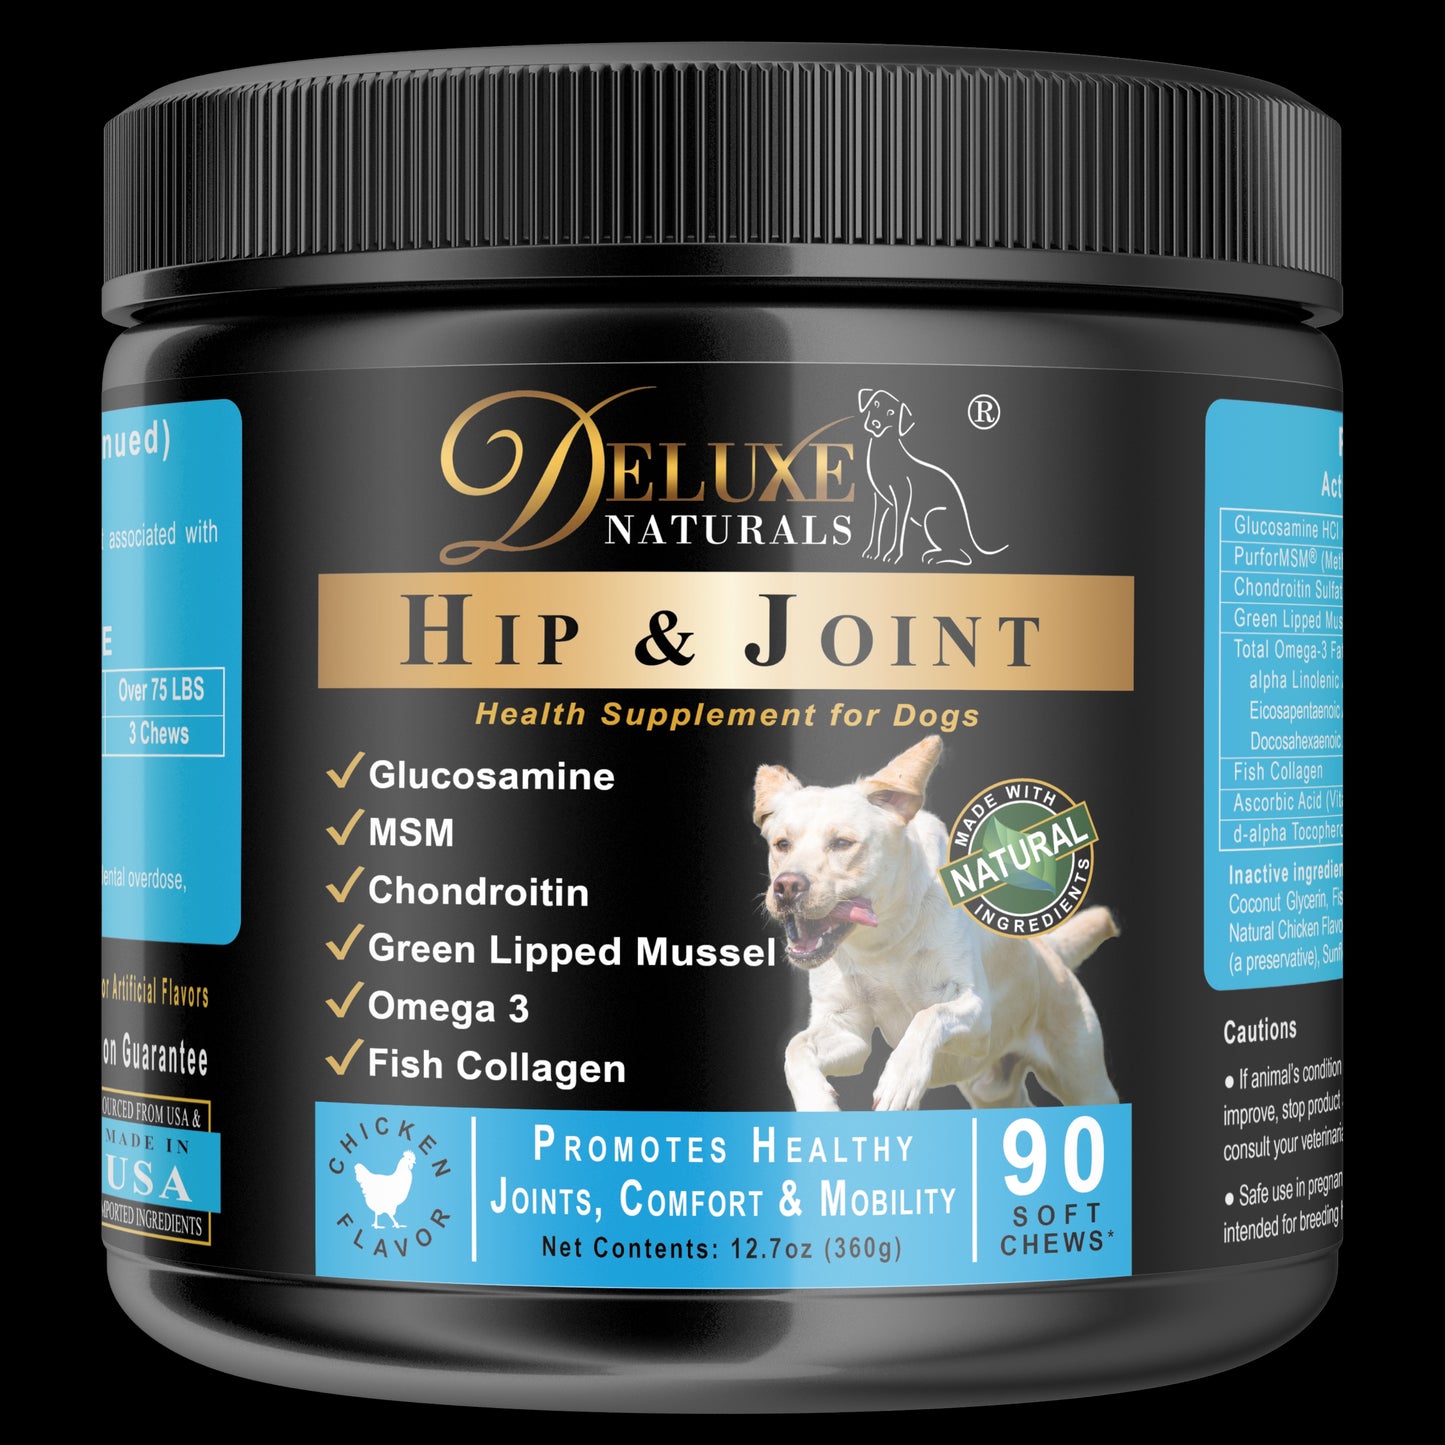 Deluxe Naturals Hip and Joint Soft Chews for Dogs - 180 Count (Pack of 2 x 90ct)